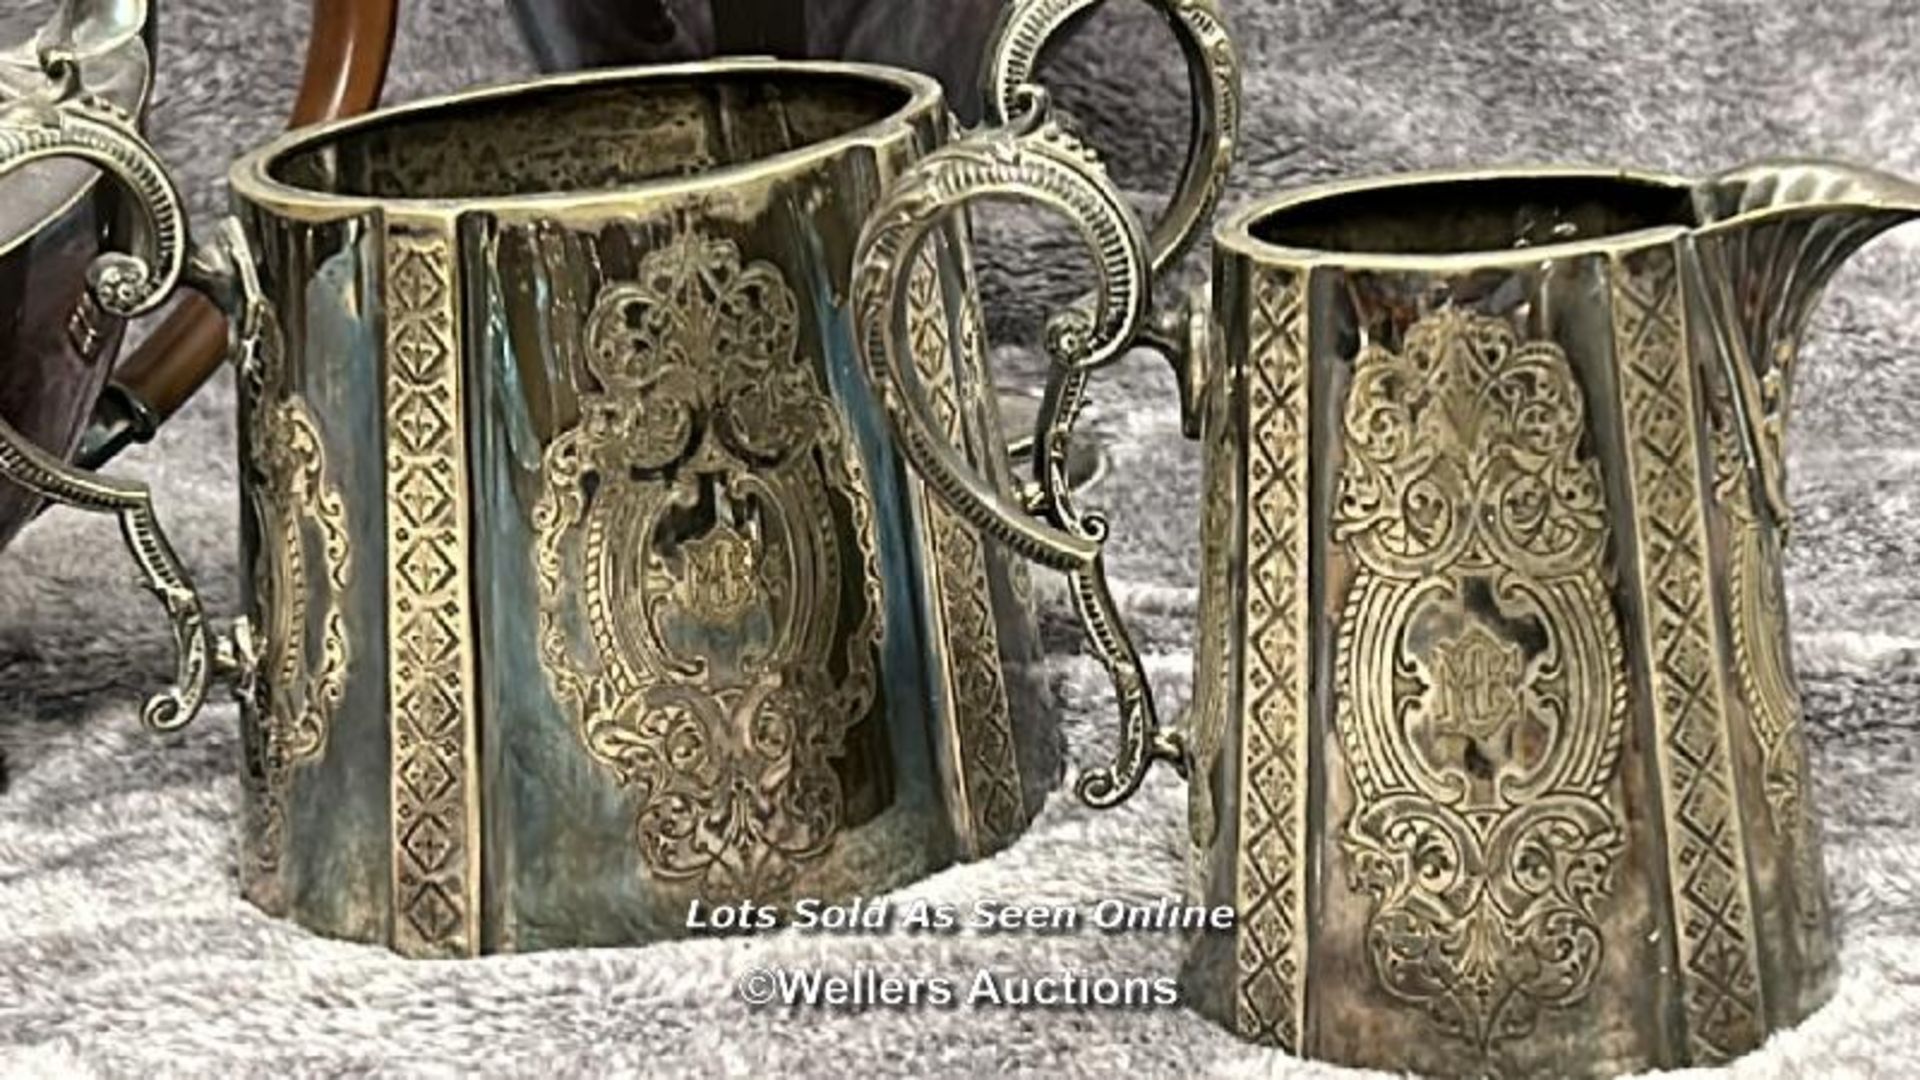 A large collection of antique metal plated items including a three armed candelabra, goblets, - Image 12 of 17